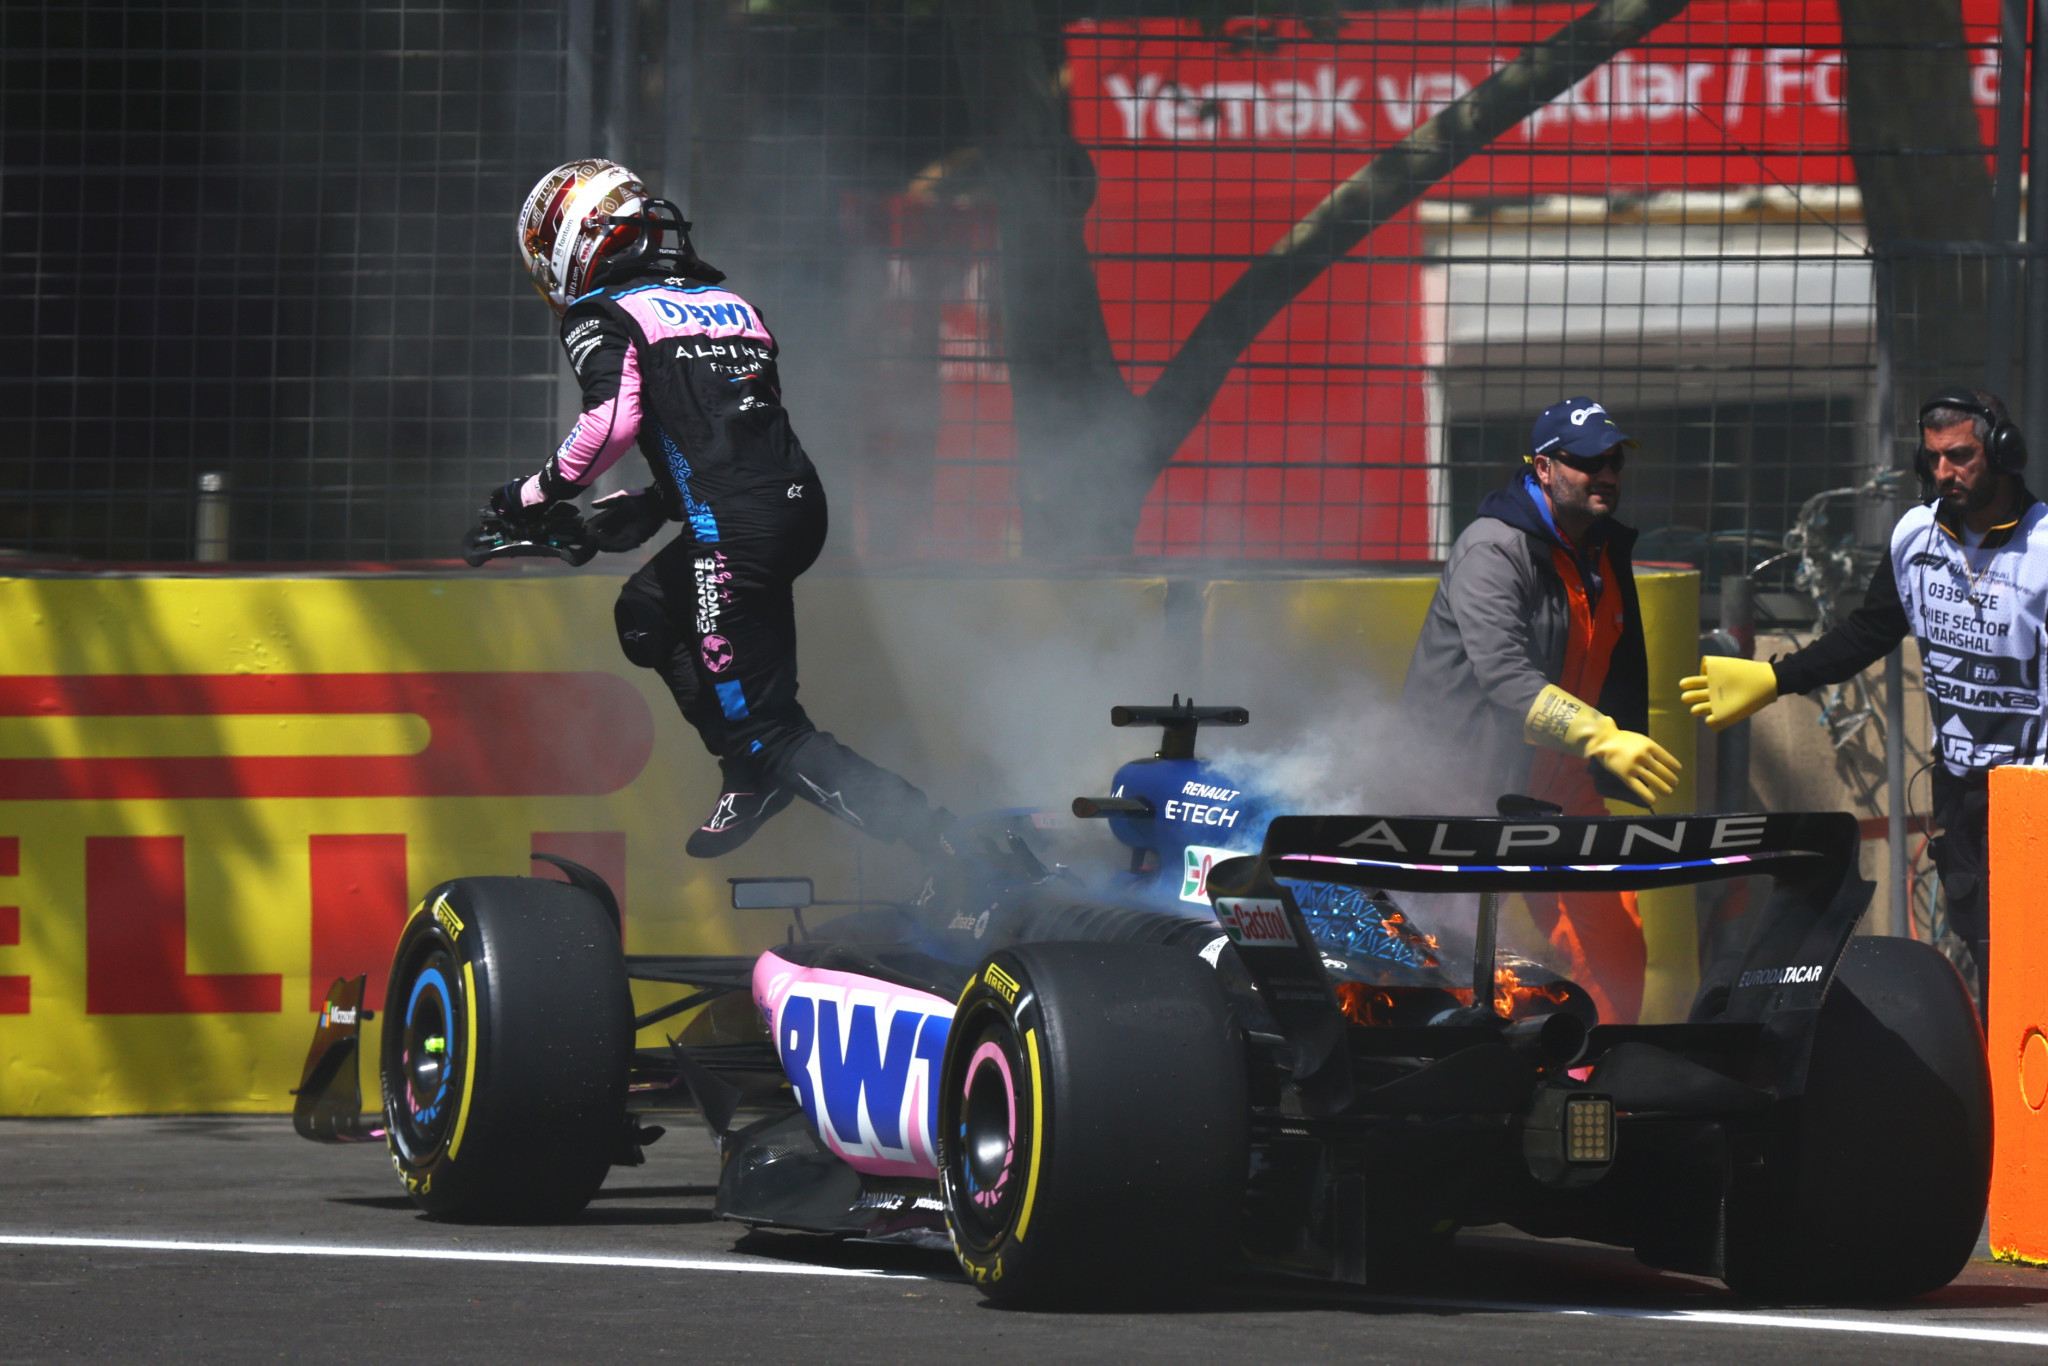 Pierre Gasly of Alpine also had a difficult day as he crashed out of qualifying as well as having to abandon his car in the practice session when the engine caught fire ©Getty Images